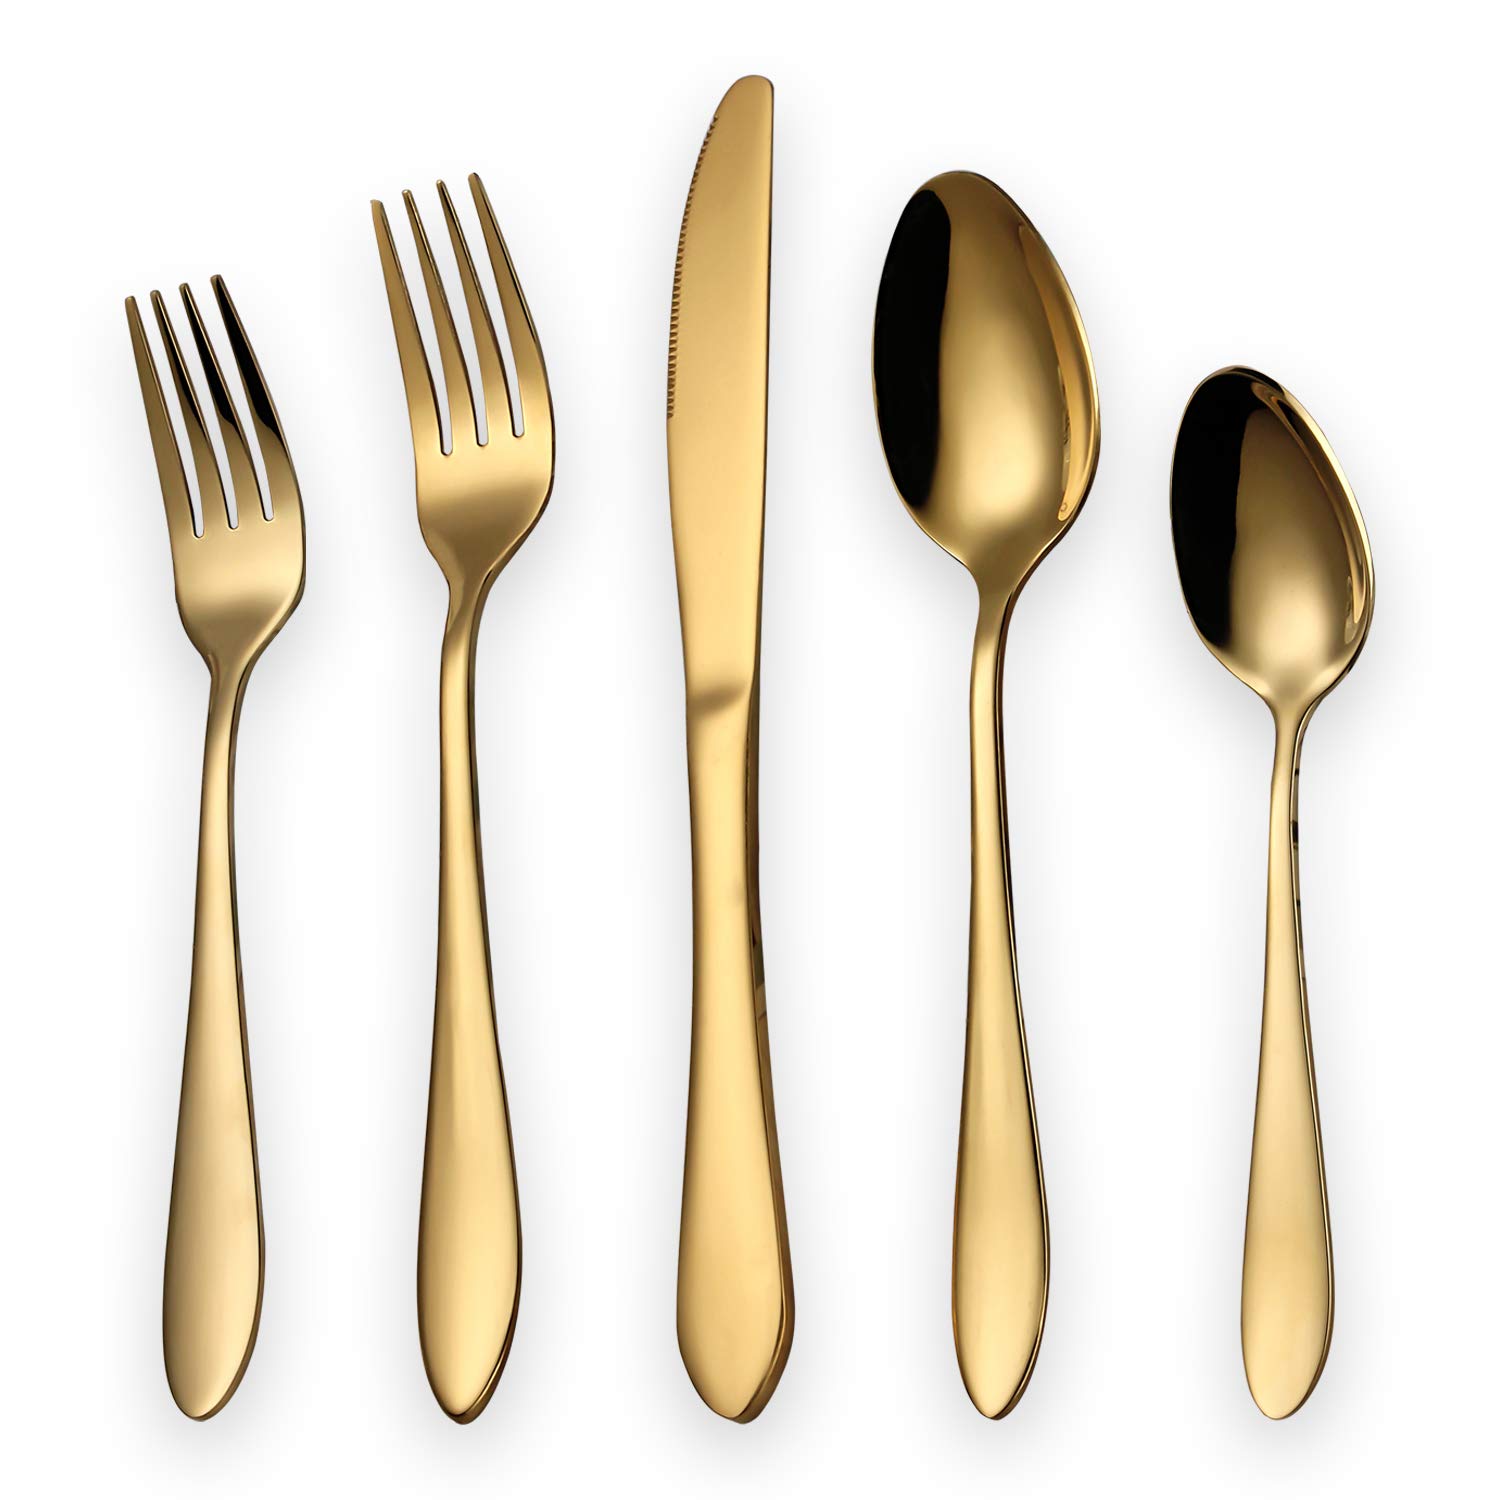 Shiny Black Golden Berglander 24 Piece Titanium Black and Golden Plated Stainless Steel Silverware Set,Black Handle with Golden Mouth Flatware Set Black and Golden Cutlery Set Service for 6 